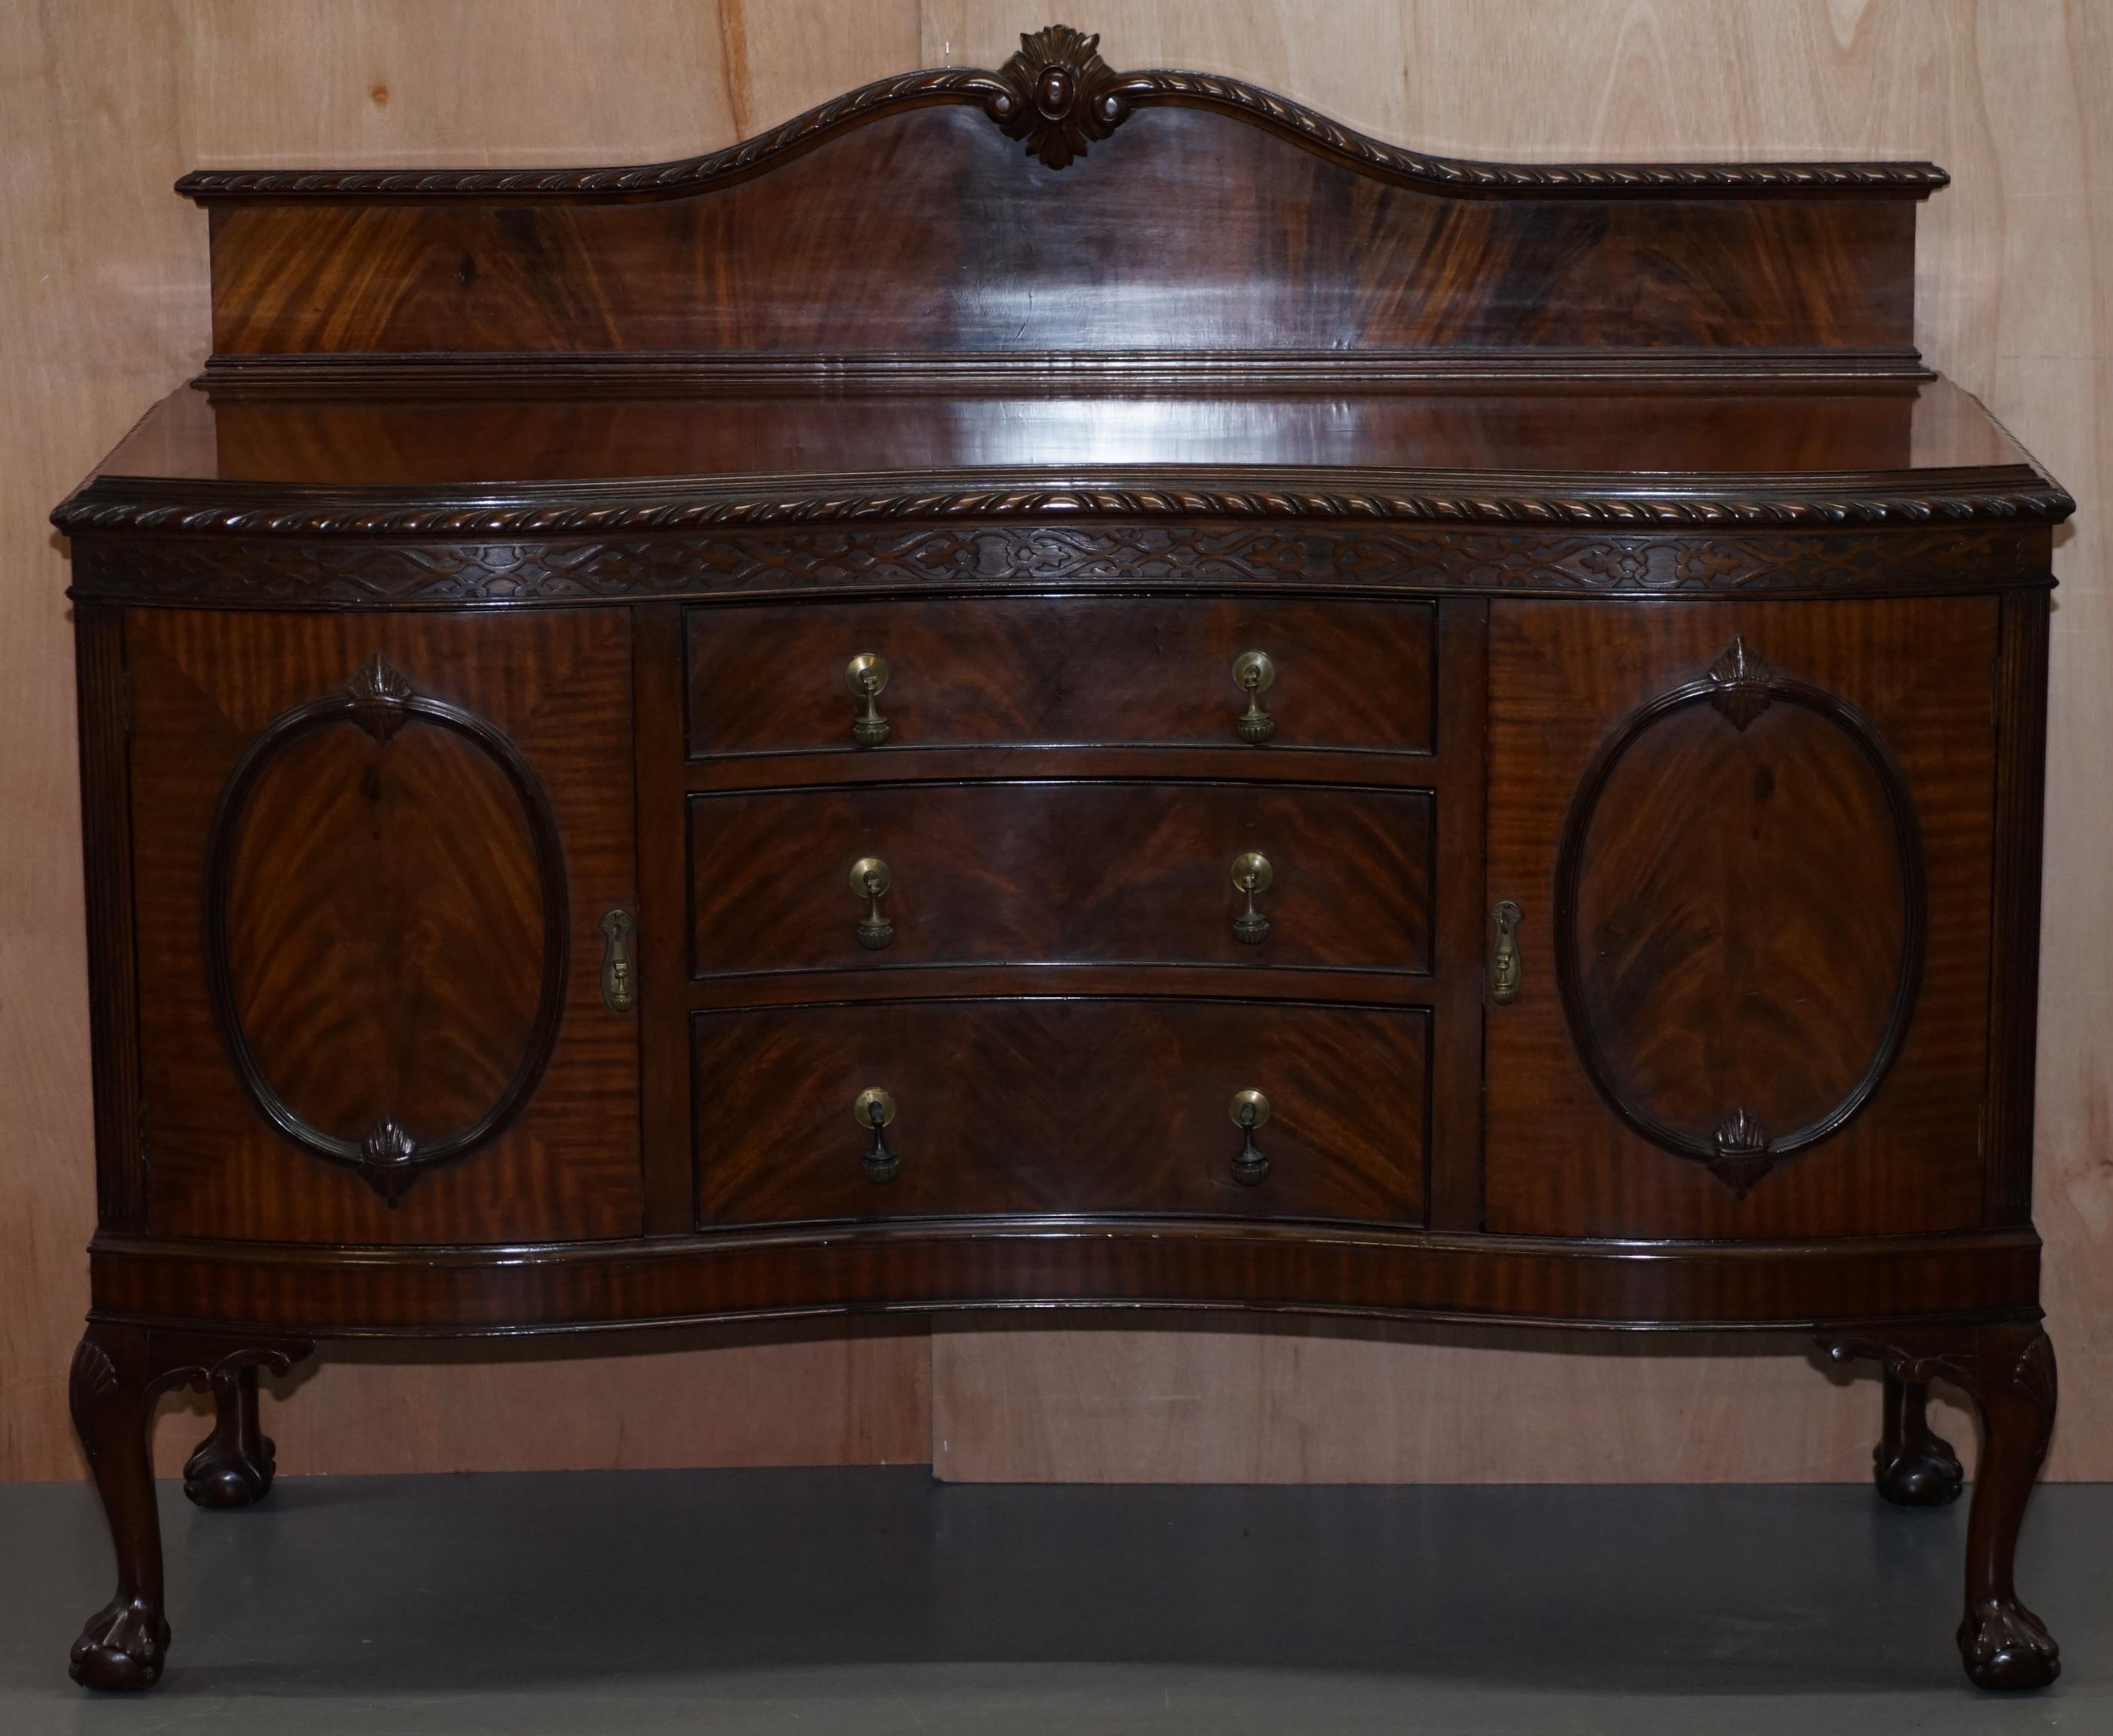 We are delighted to offer for sale this lovely circa 1920s Magnum Cabinet Co LTD Thomas Chippendale style sideboard with claw & ball feet

A very good looking and decorative sideboard, its very stylish and extremely high quality. The legs are